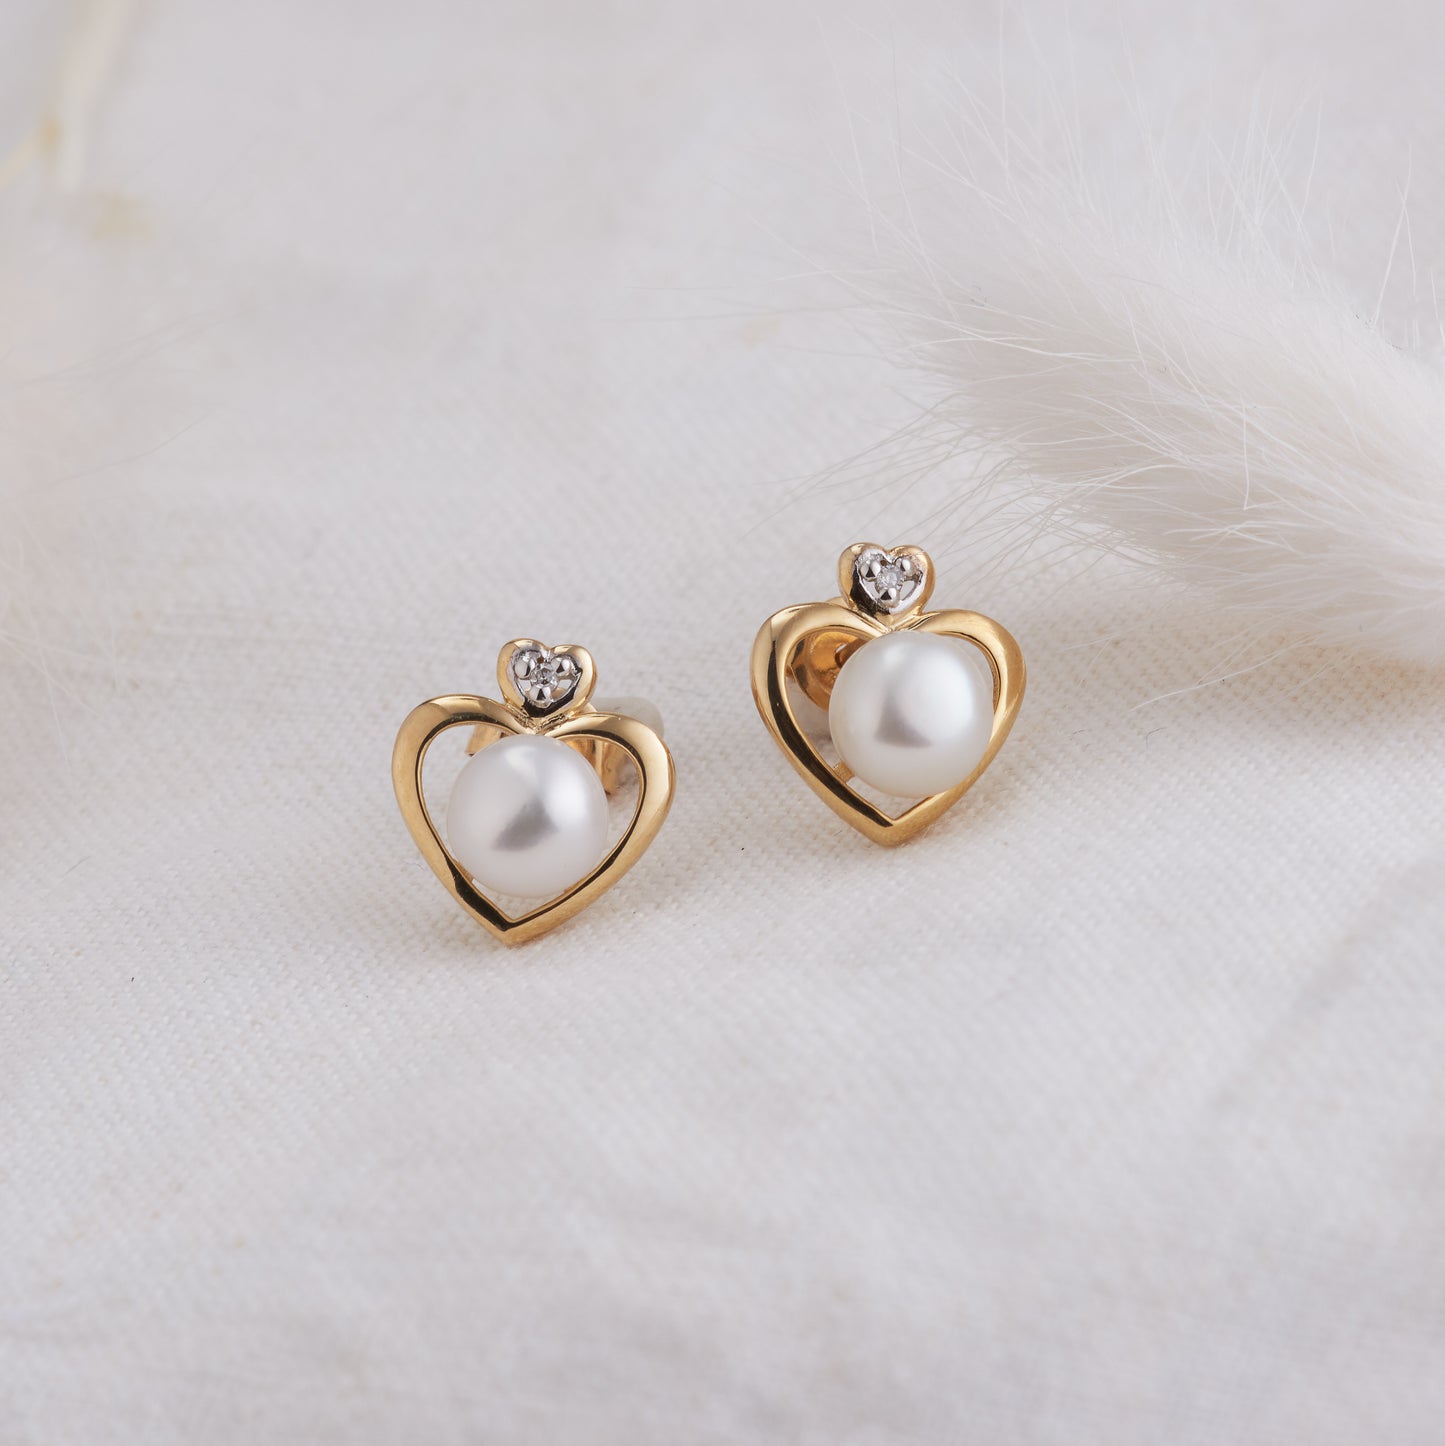 9K Yellow Gold White Freshwater Pearl and Diamond Heart Stud Earrings